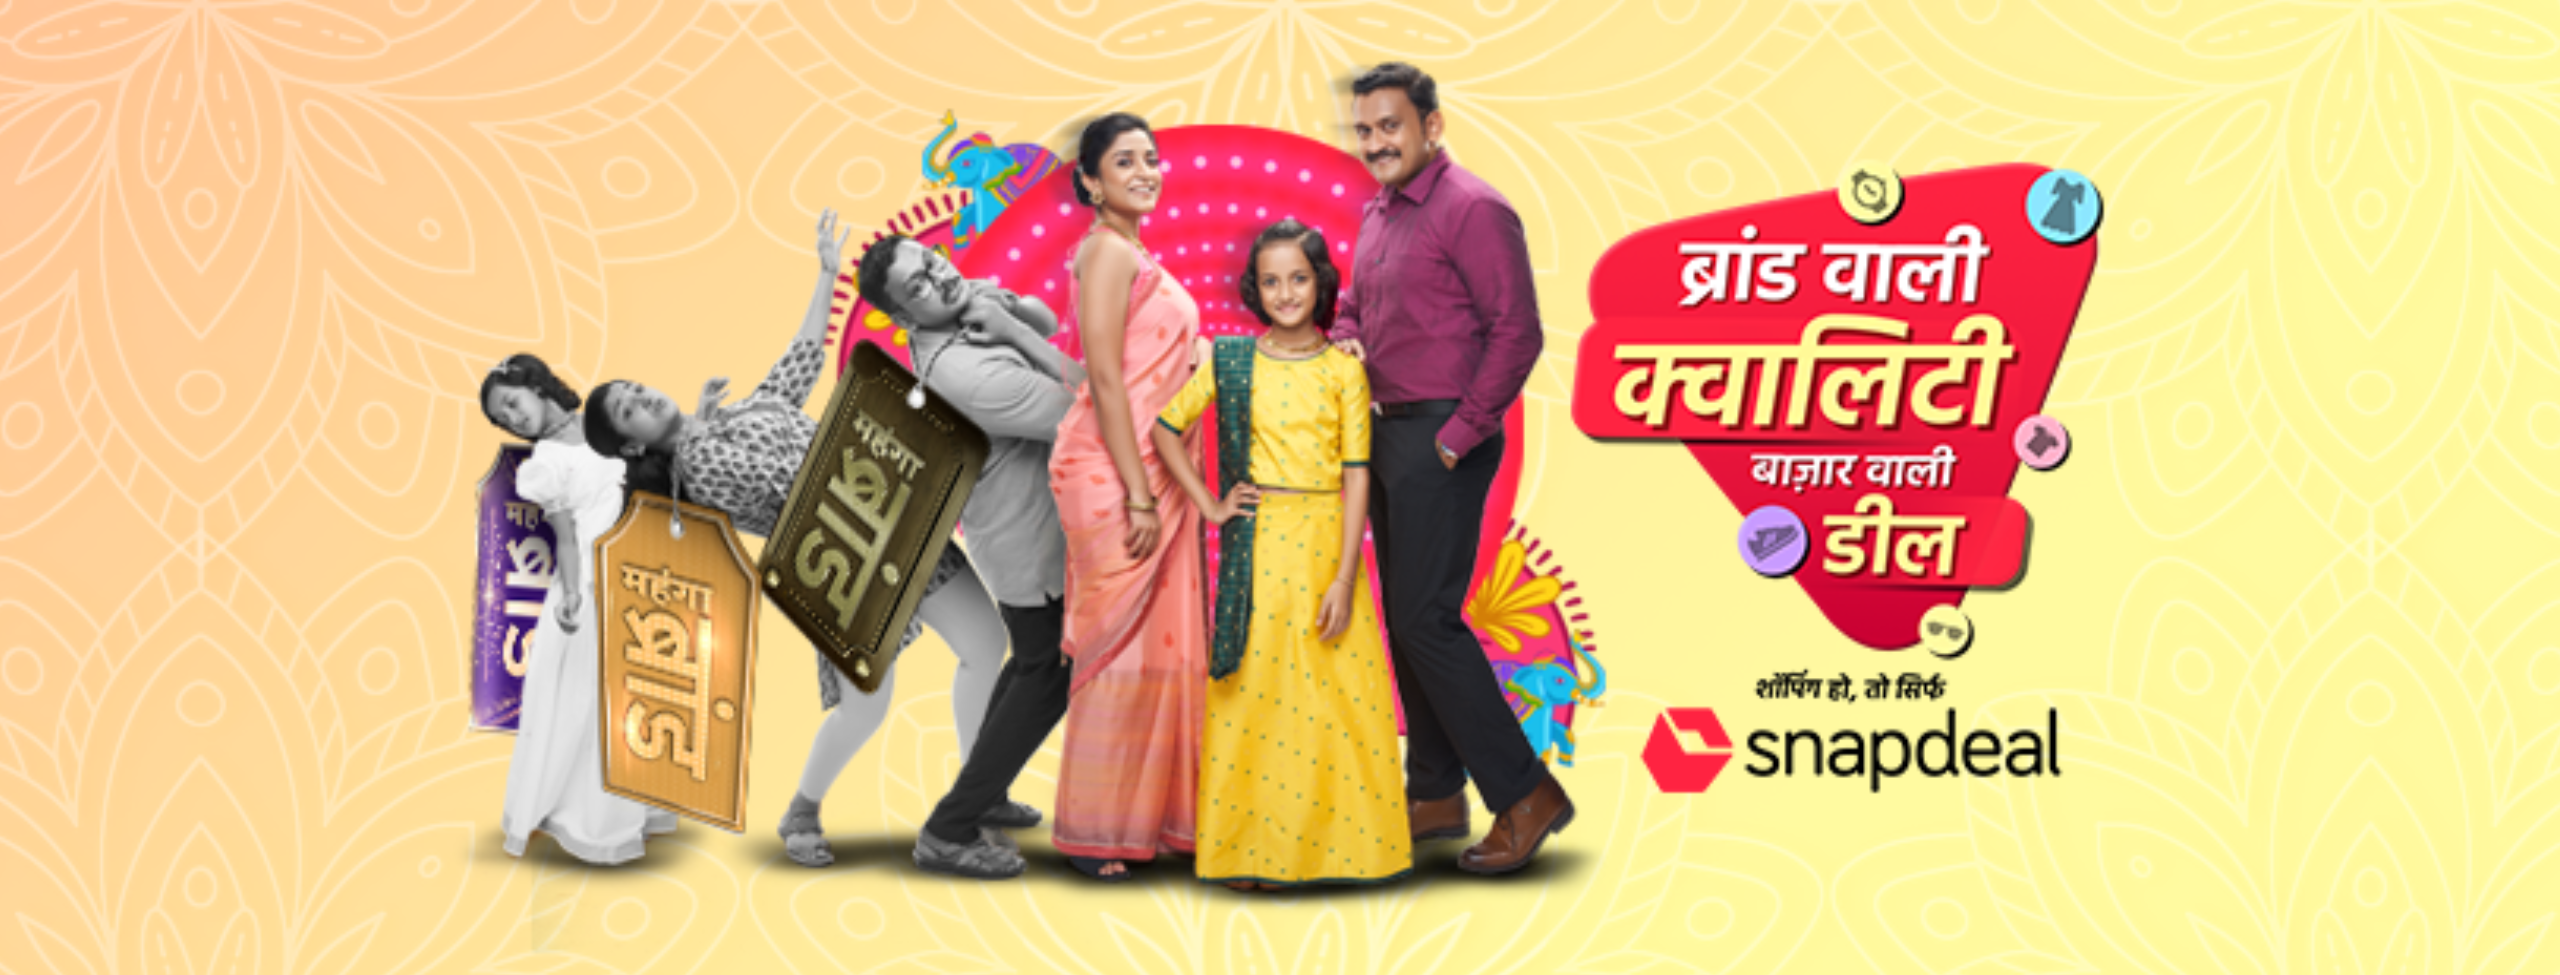 Snapdeal Banner